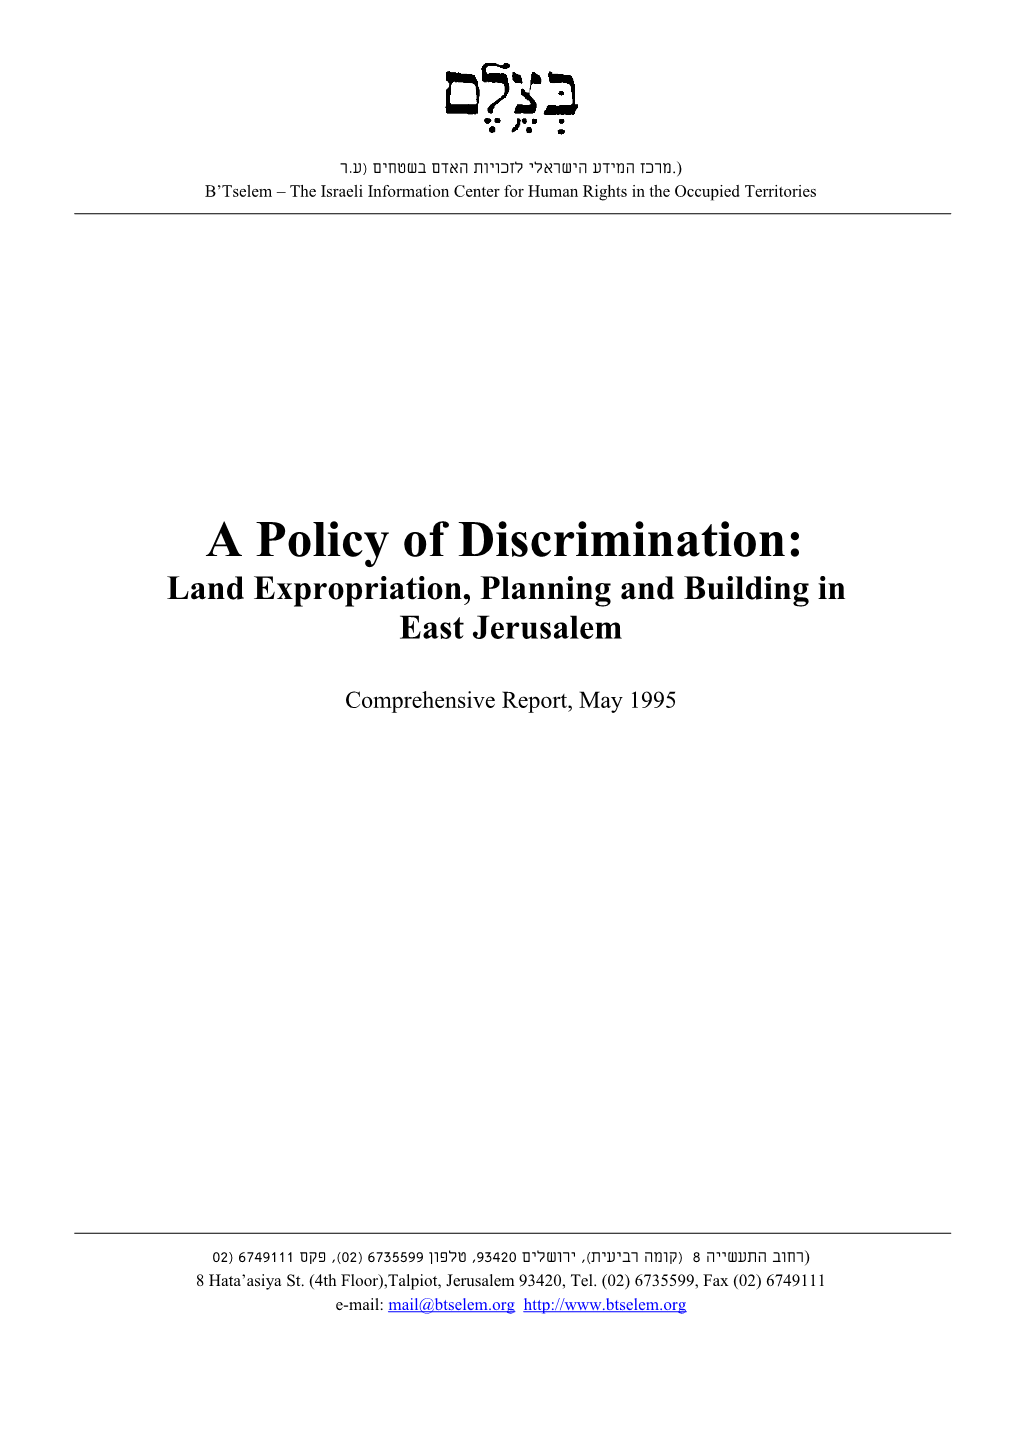 B'tselem Report - a Policy of Discrimination: Land Expropriation, Planning and Building In